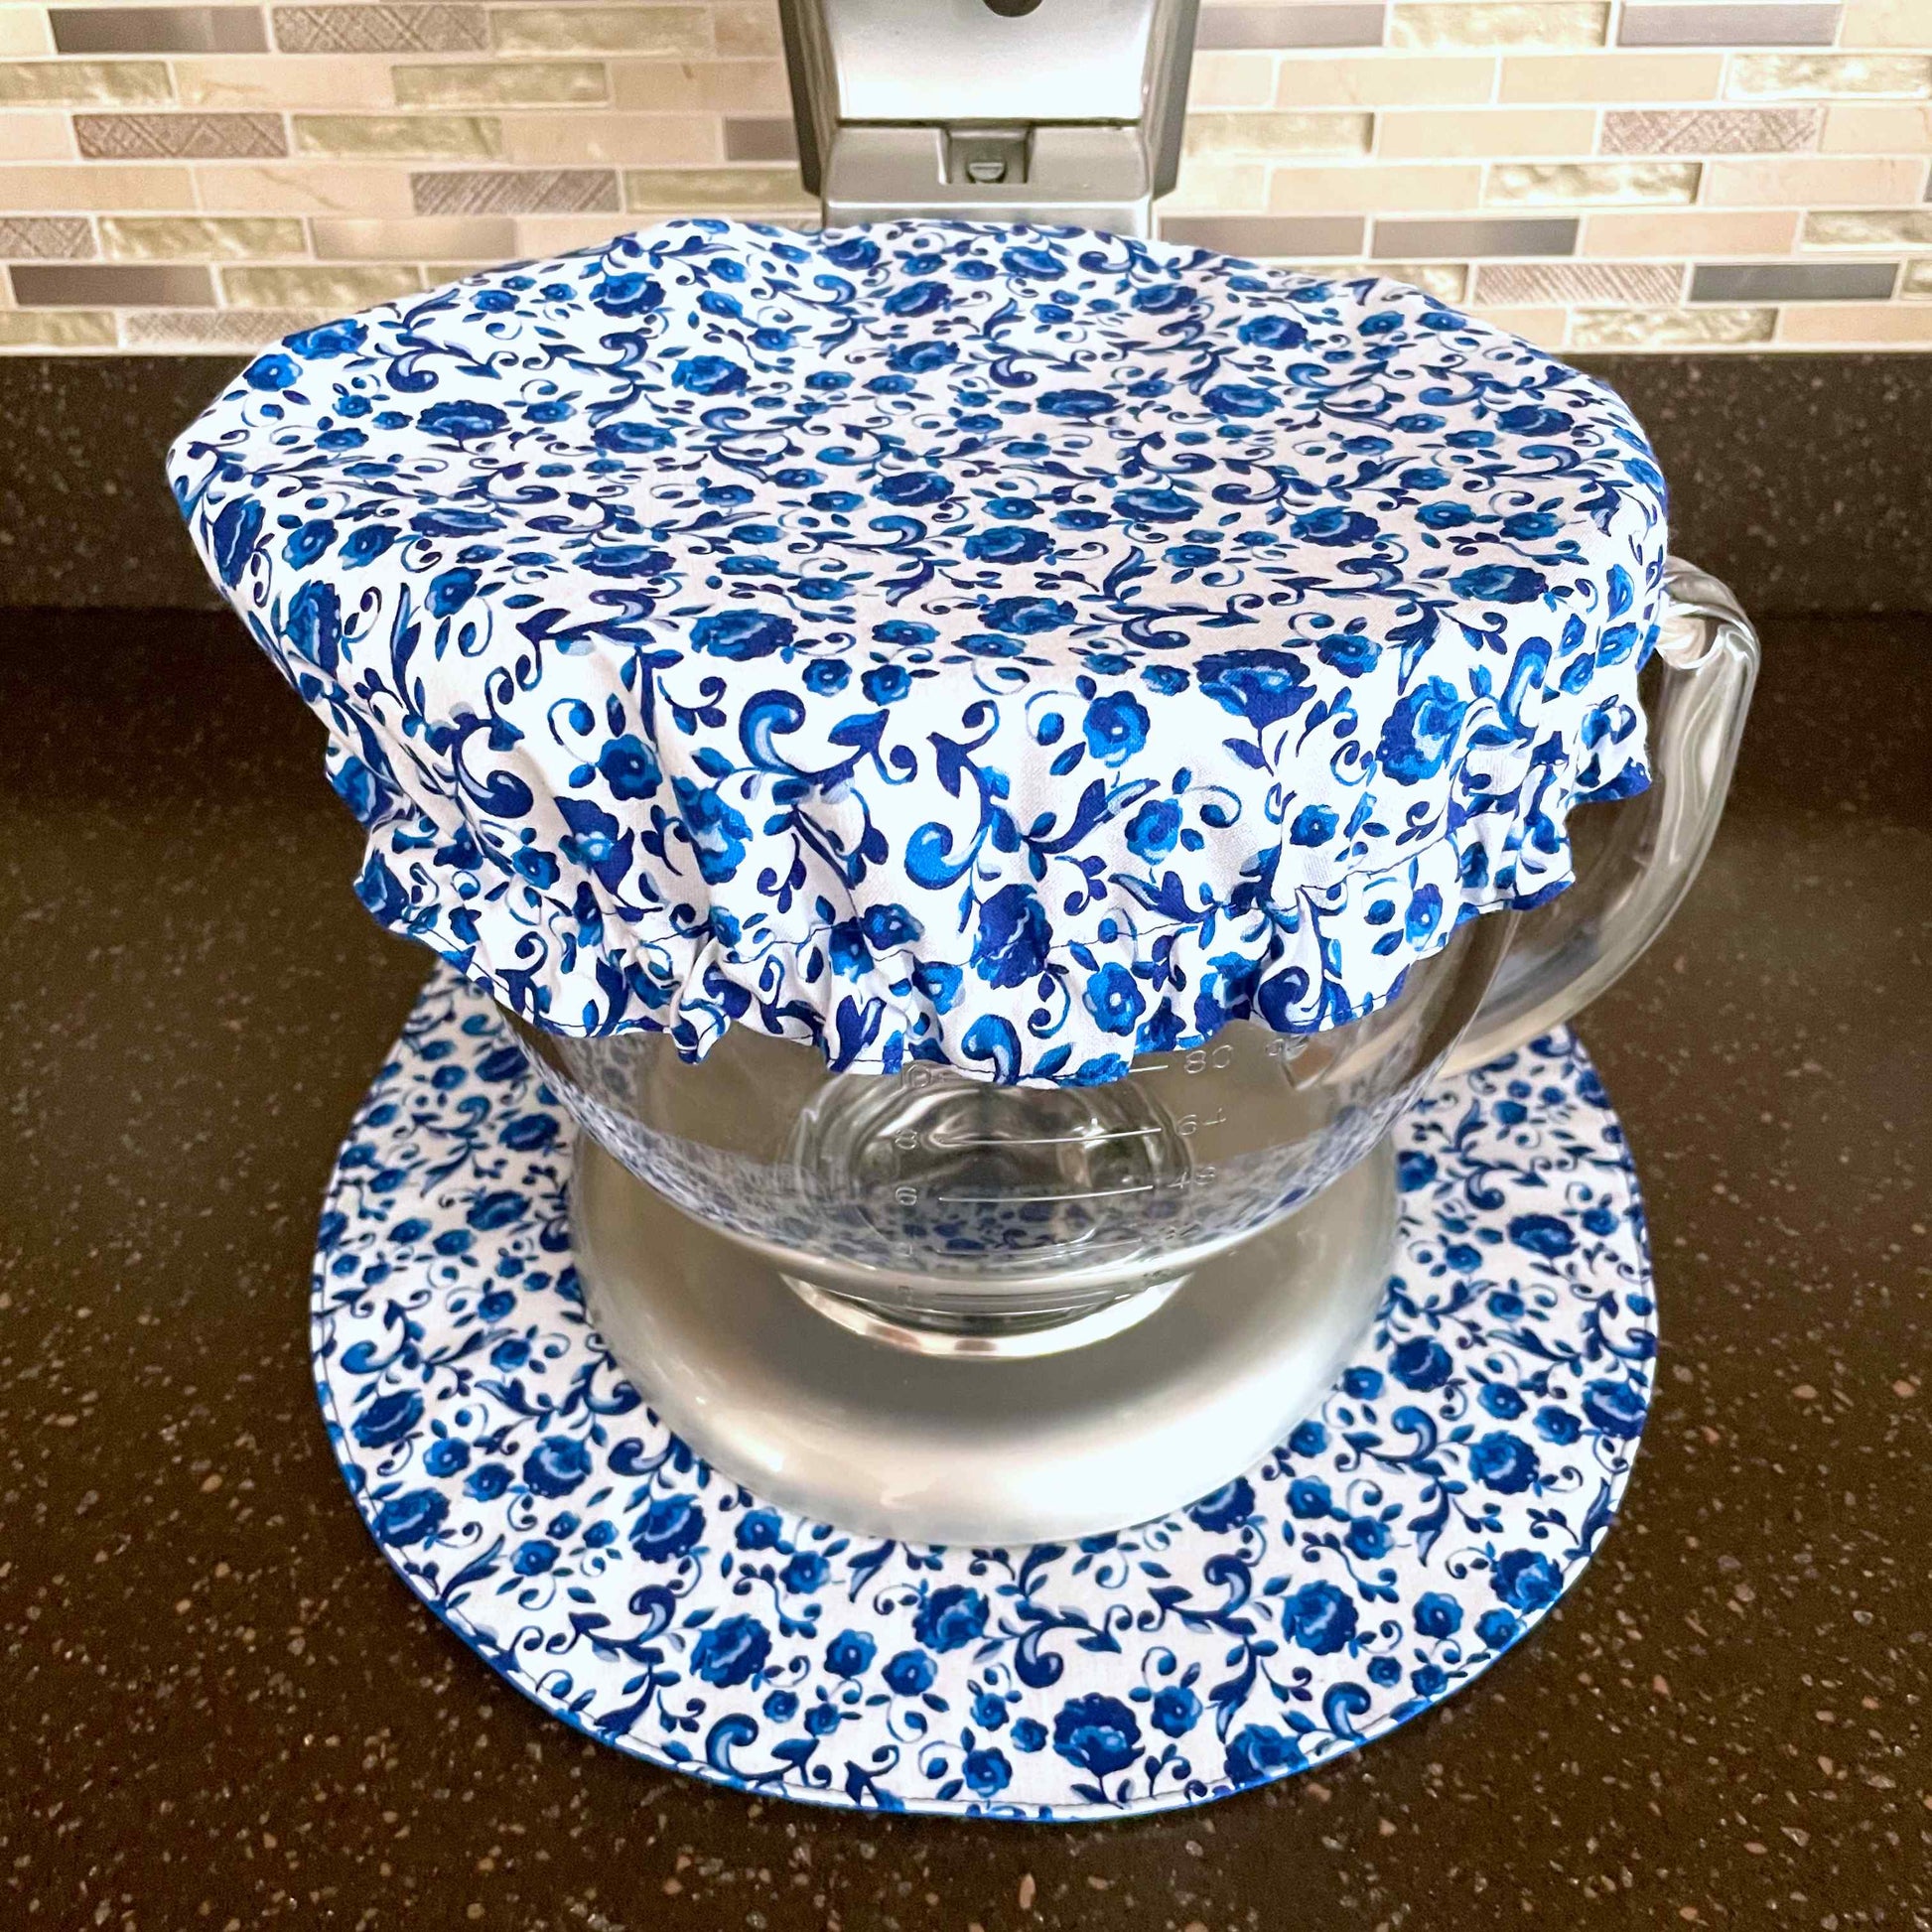 Reusable Dish Cover - Blue & White Floral